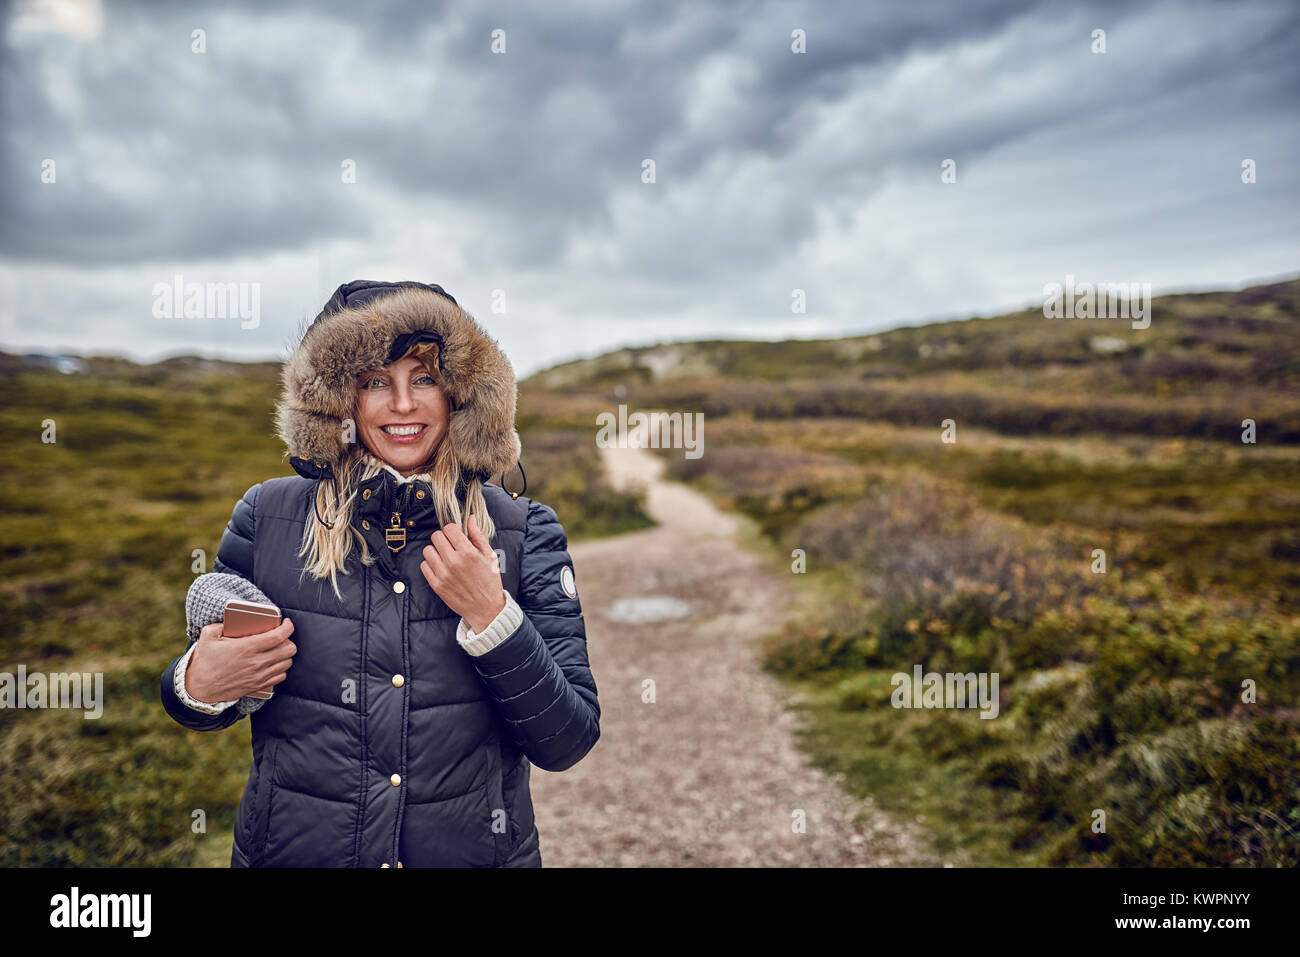 Middle-aged woman braving a cold winter day in nature walking through the landscape on a breezy day smiling happily at the camera Stock Photo